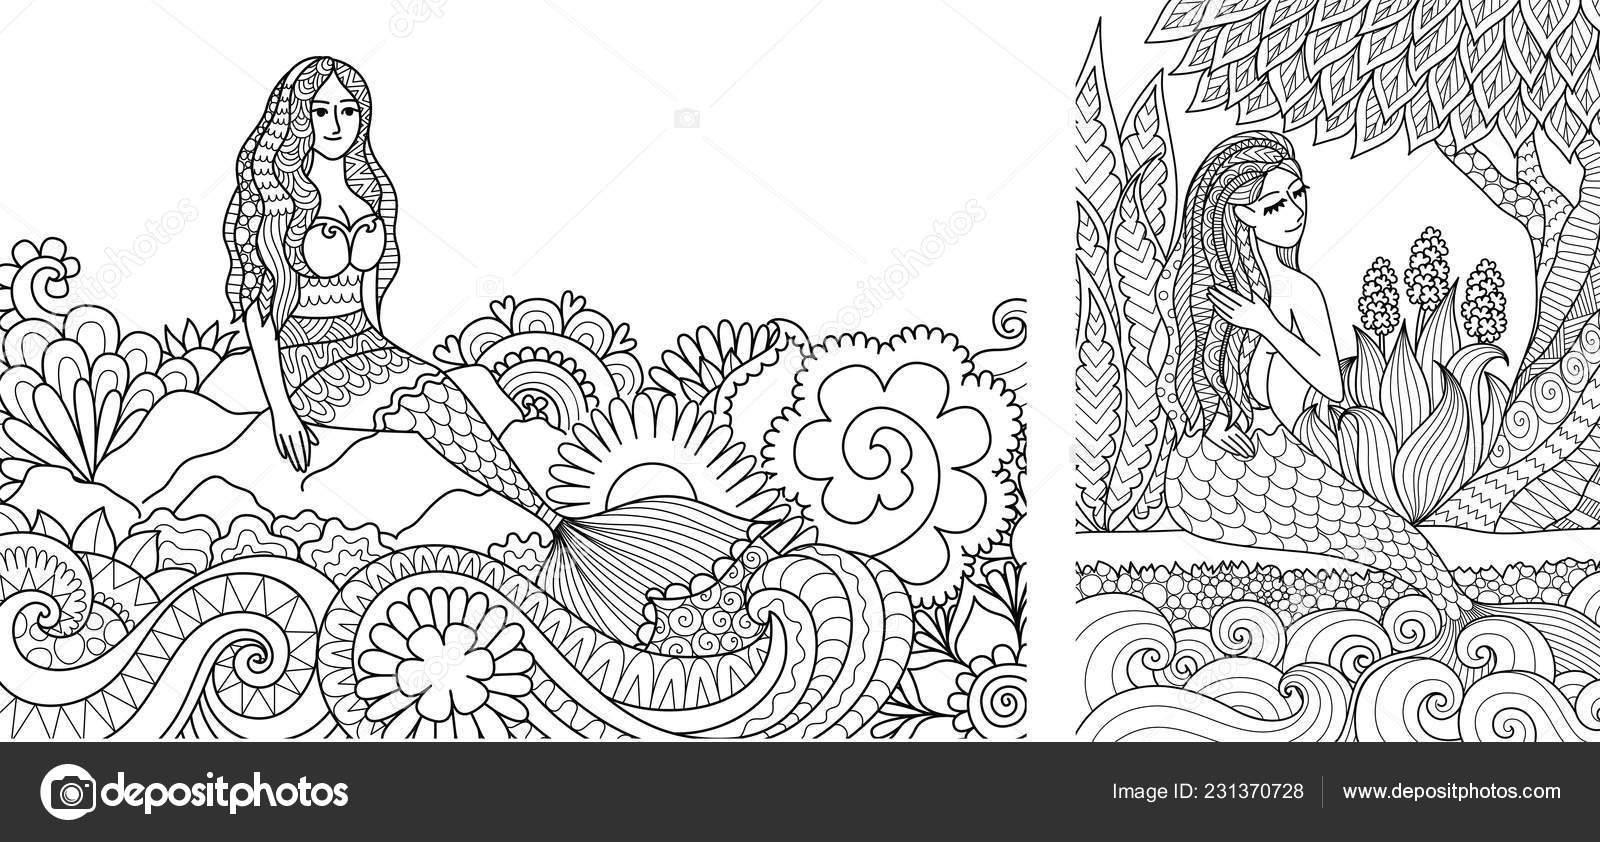 Pretty mermaid sitting stone beautiful ocean wave adult coloring book stock vector by somjaicindygmail